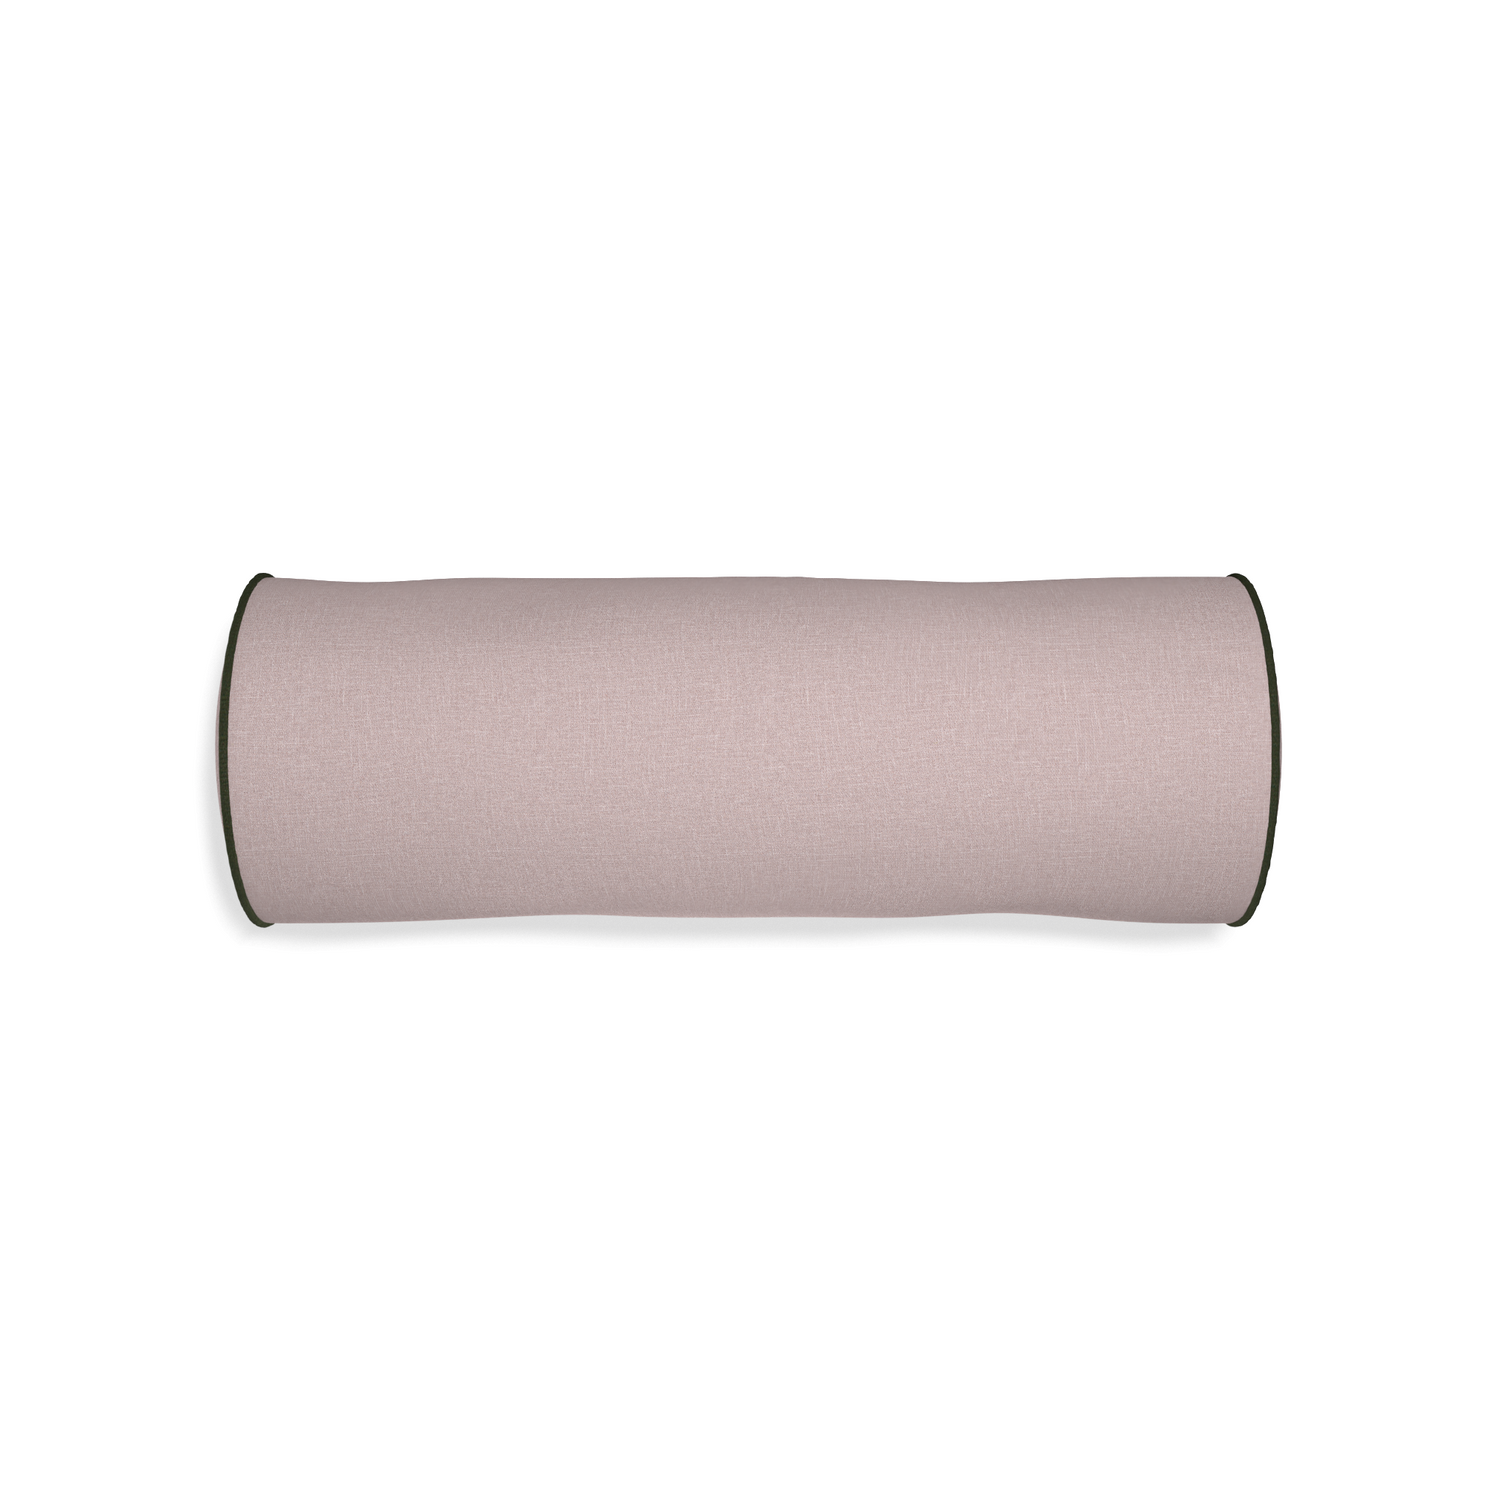 Bolster orchid custom mauve pinkpillow with f piping on white background